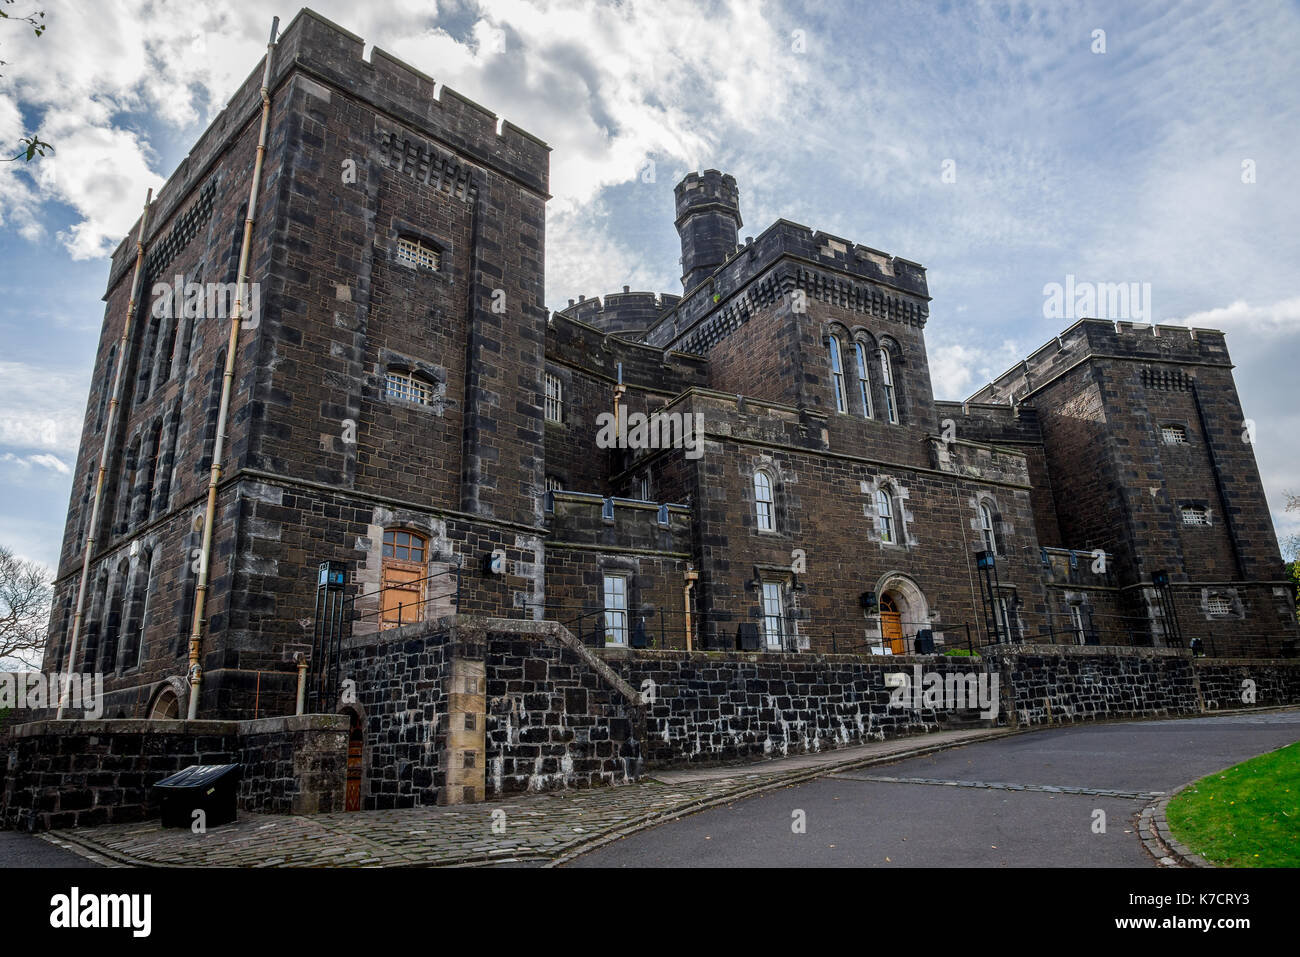 Front view of scenic Stirling Old Town Jail building medieval style, central Scotland Stock Photo